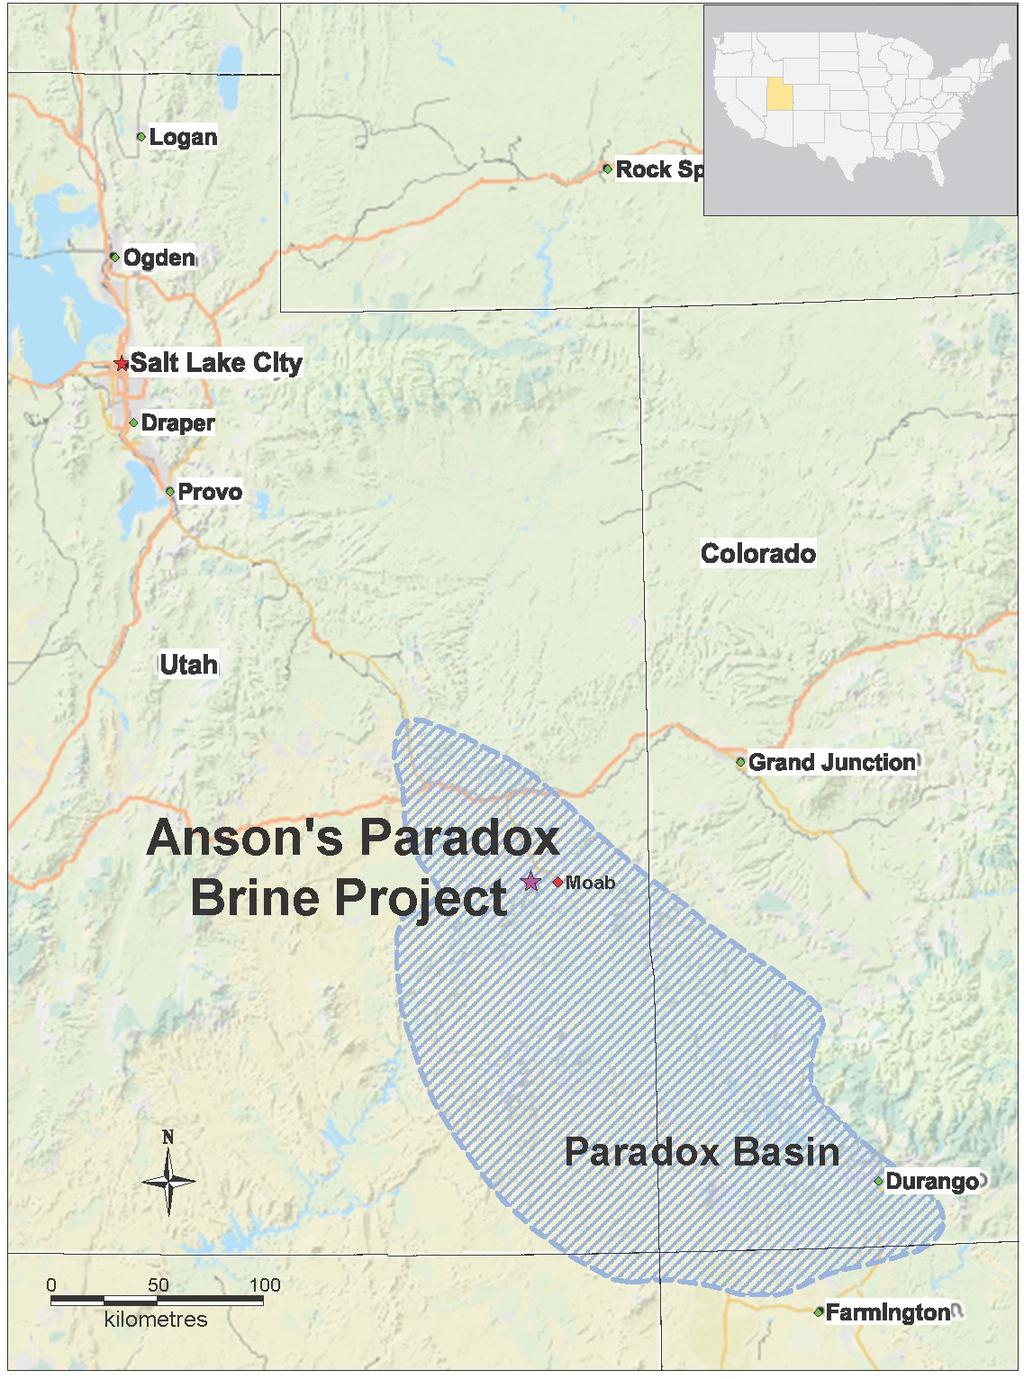 About the Utah Lithium Project Anson is targeting lithium rich brines in the deepest part of the Paradox Basin in close proximity to Moab, Utah.